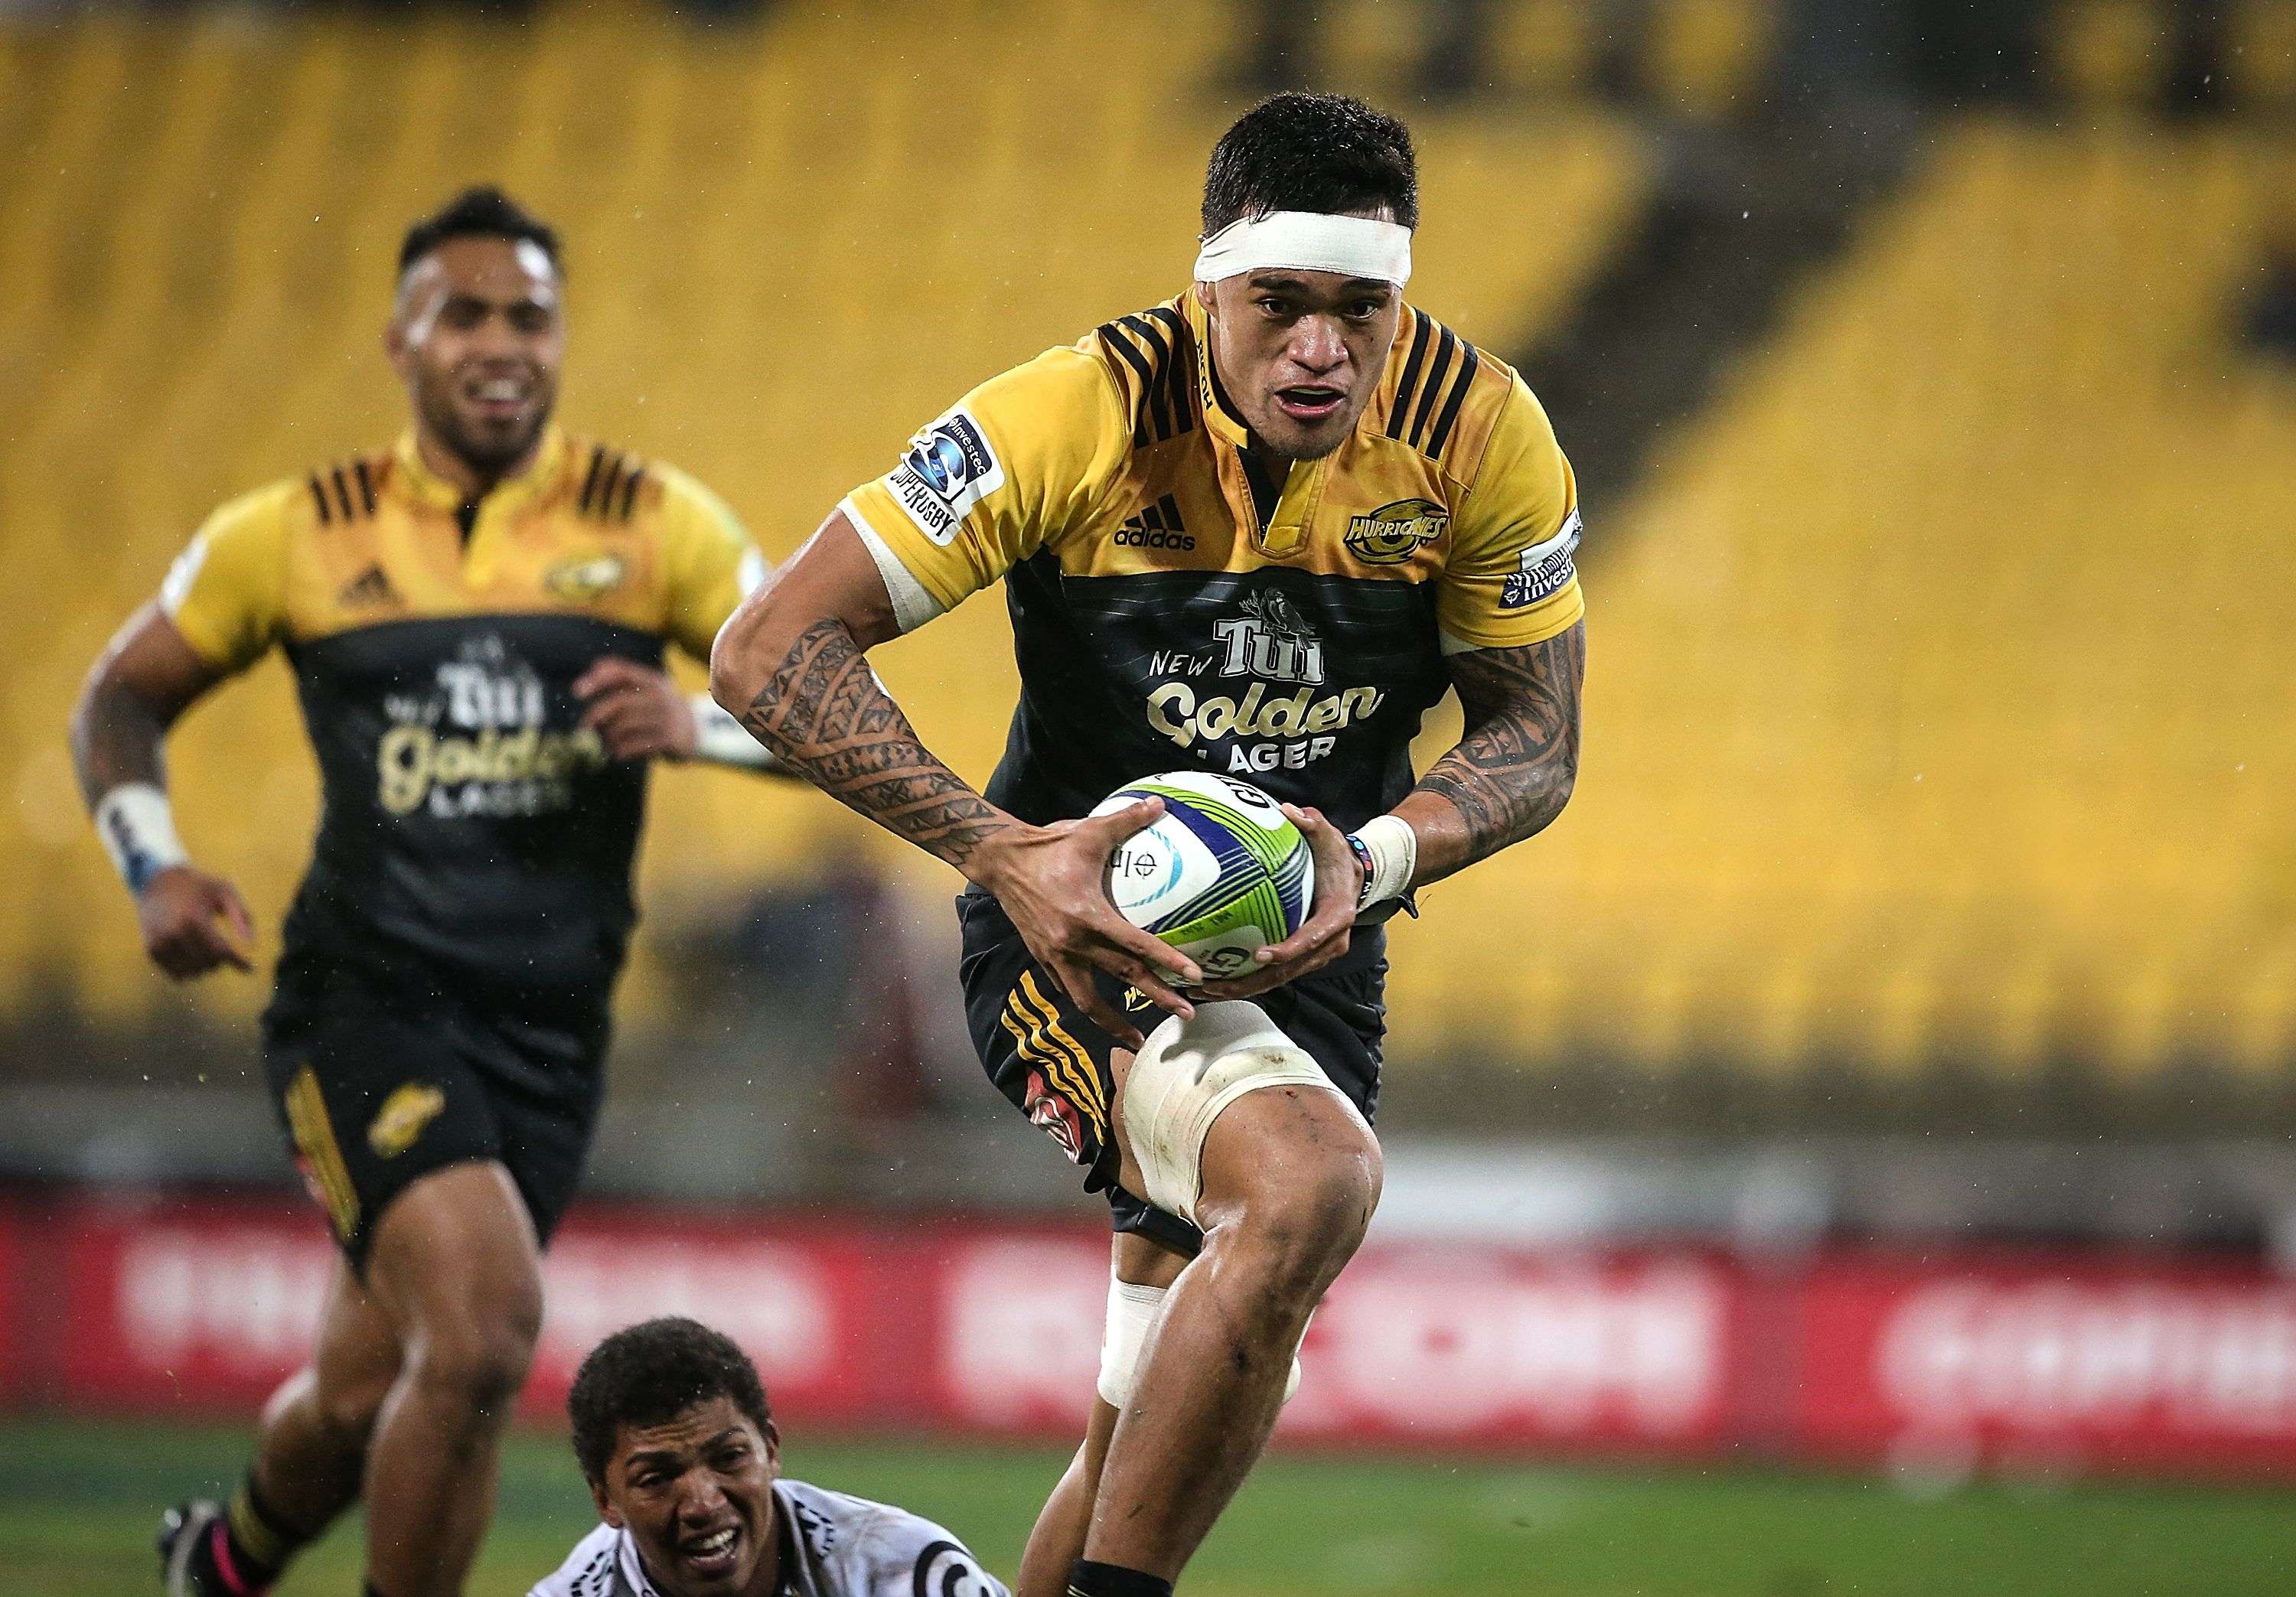 Vaea Fifita of the Hurricanes breaks away to score a try against the outclassed Coastal Sharks in Wellington. Photo: AFP